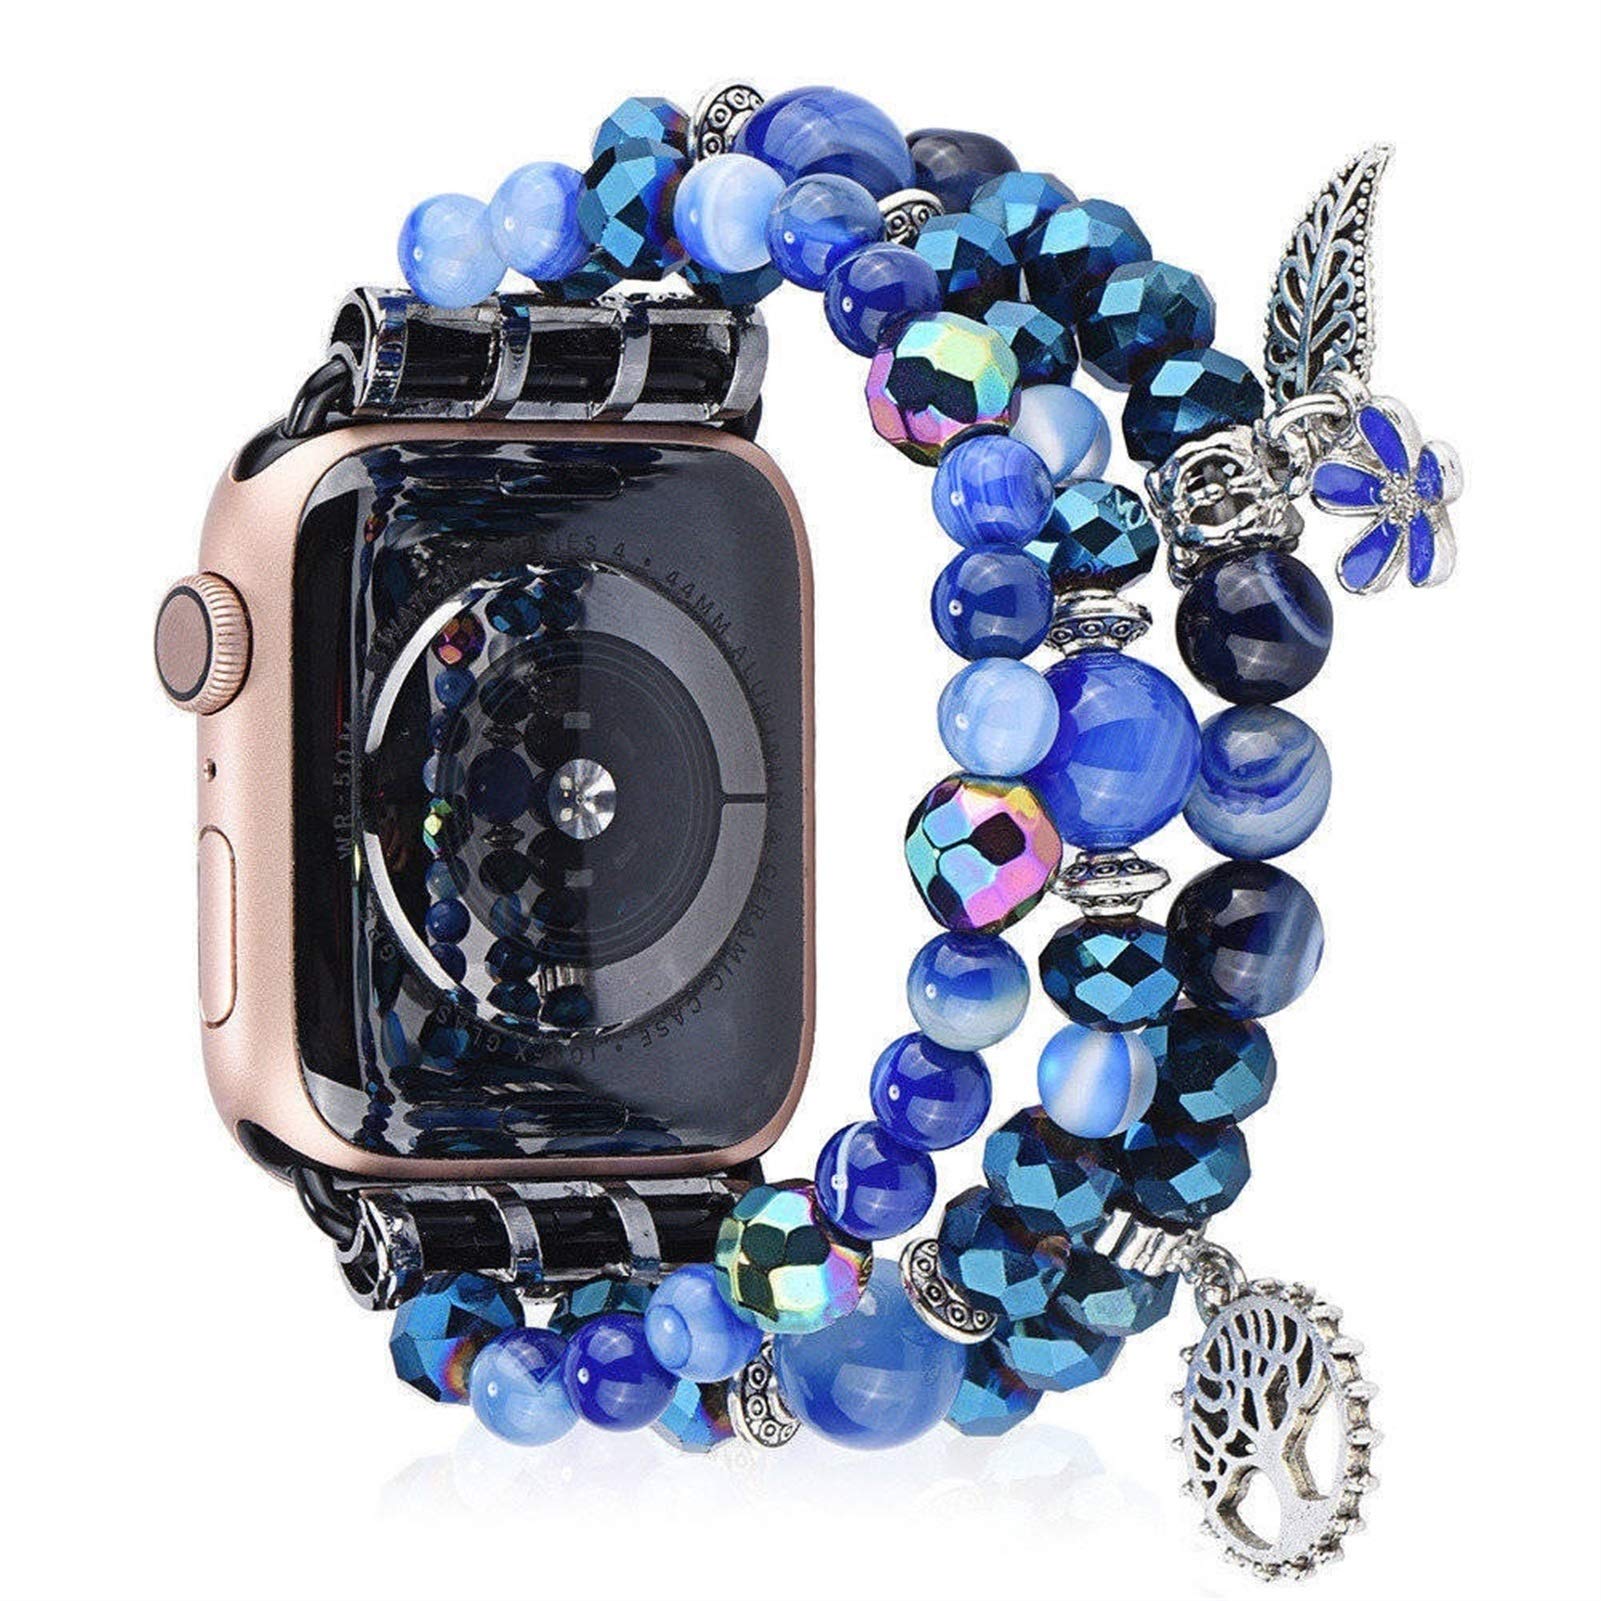 CRFYJ for Apple Watch Band Series 7/SE/6/5/4/3/2/1 Strap 38mm 40mm 42mm 44mm Diamond Metal Cover Agate Beads Bracelet (Color : Watchband, Size : 40mm)